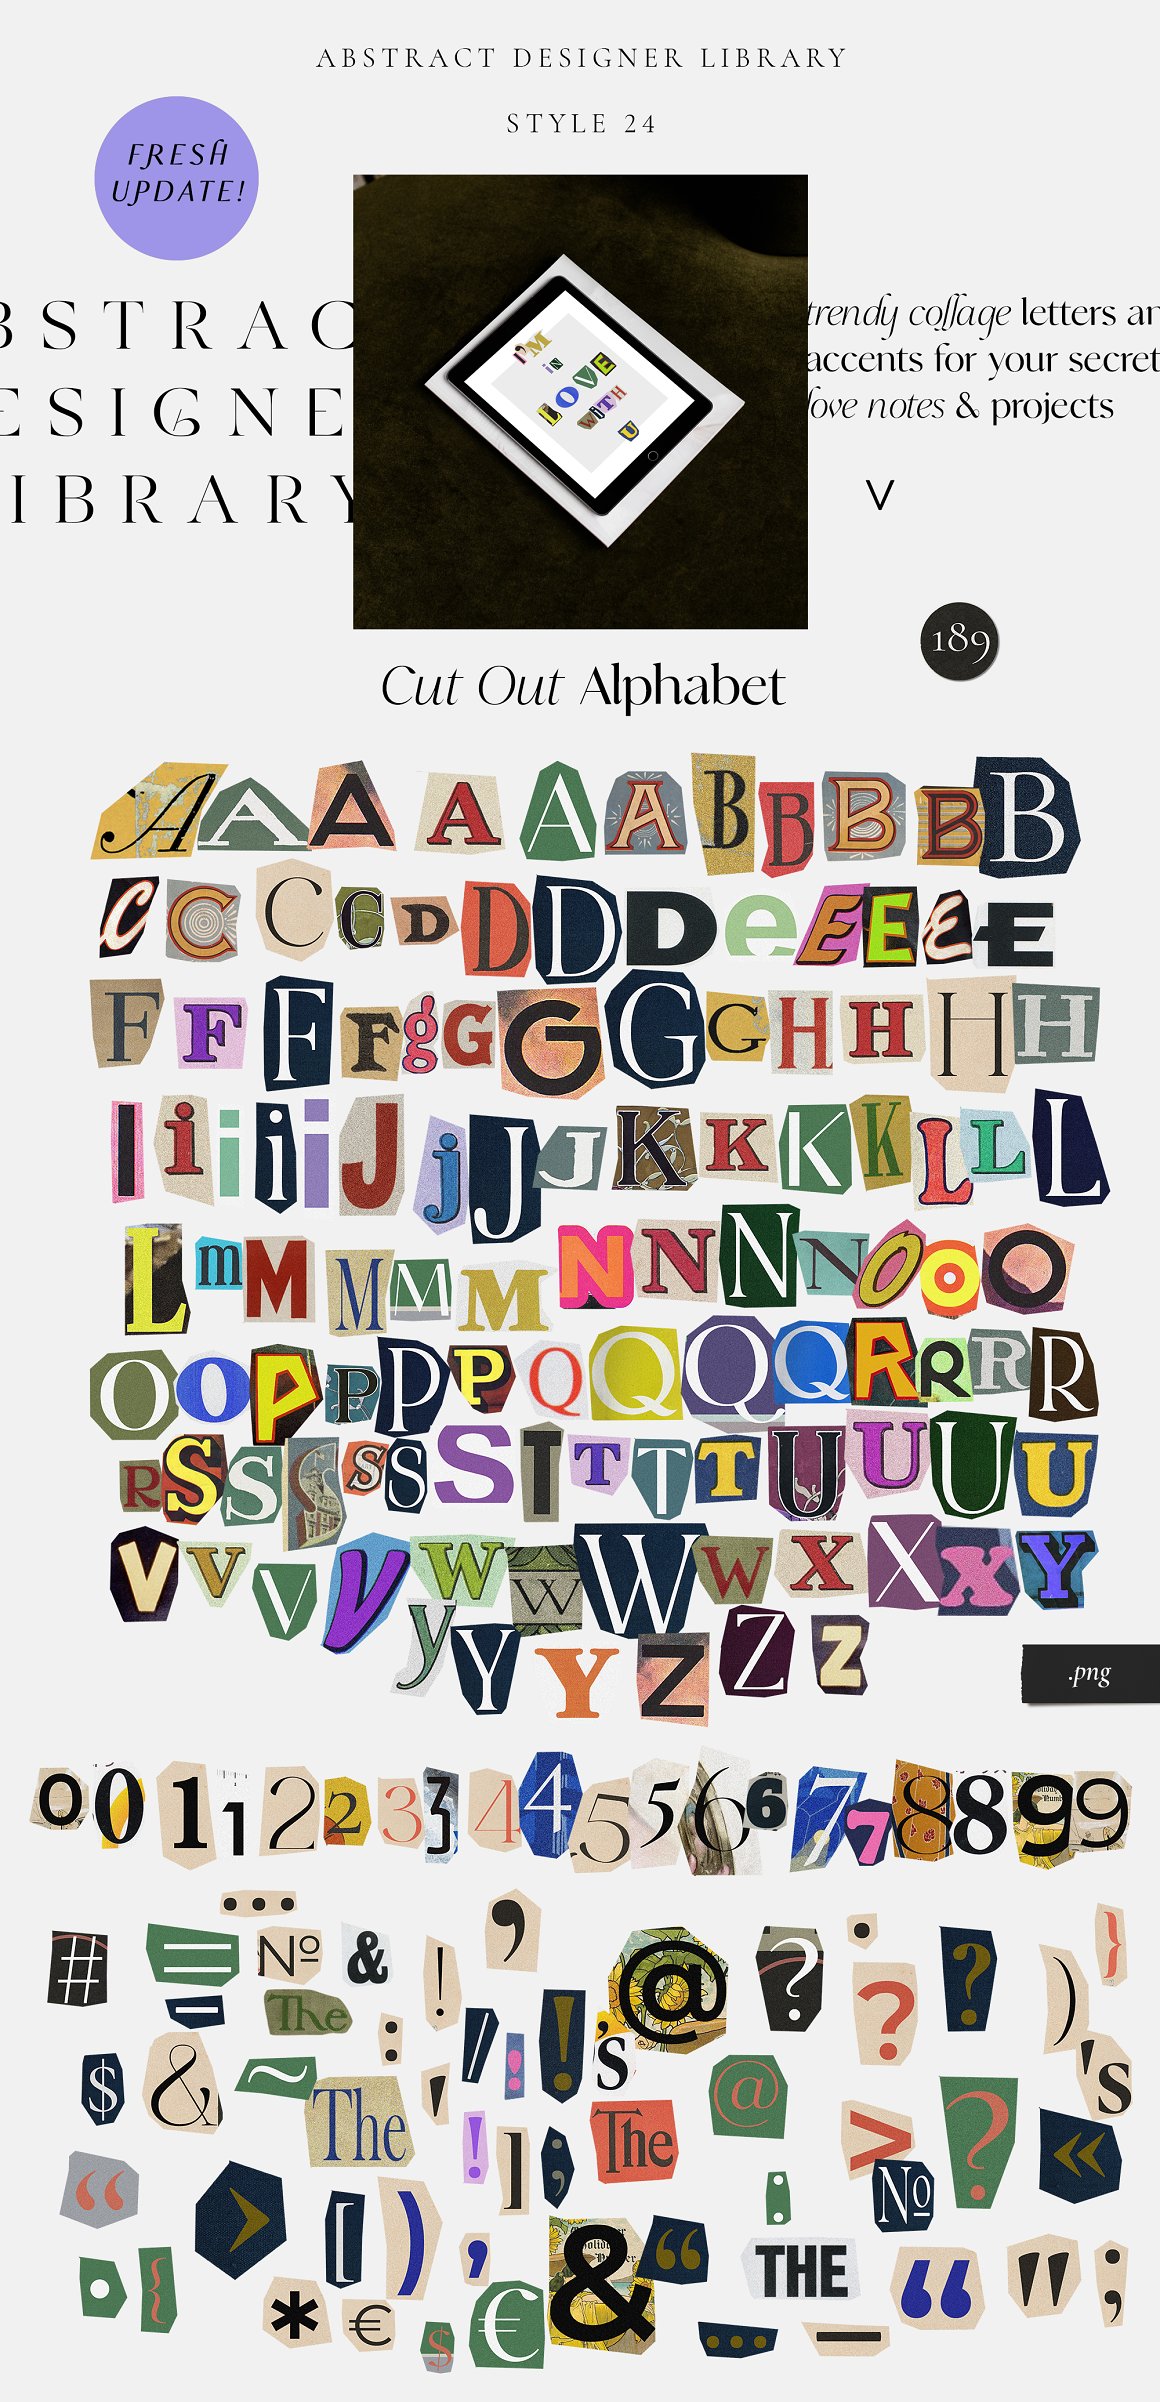 Kit of different cut out alphabet on a gray background.